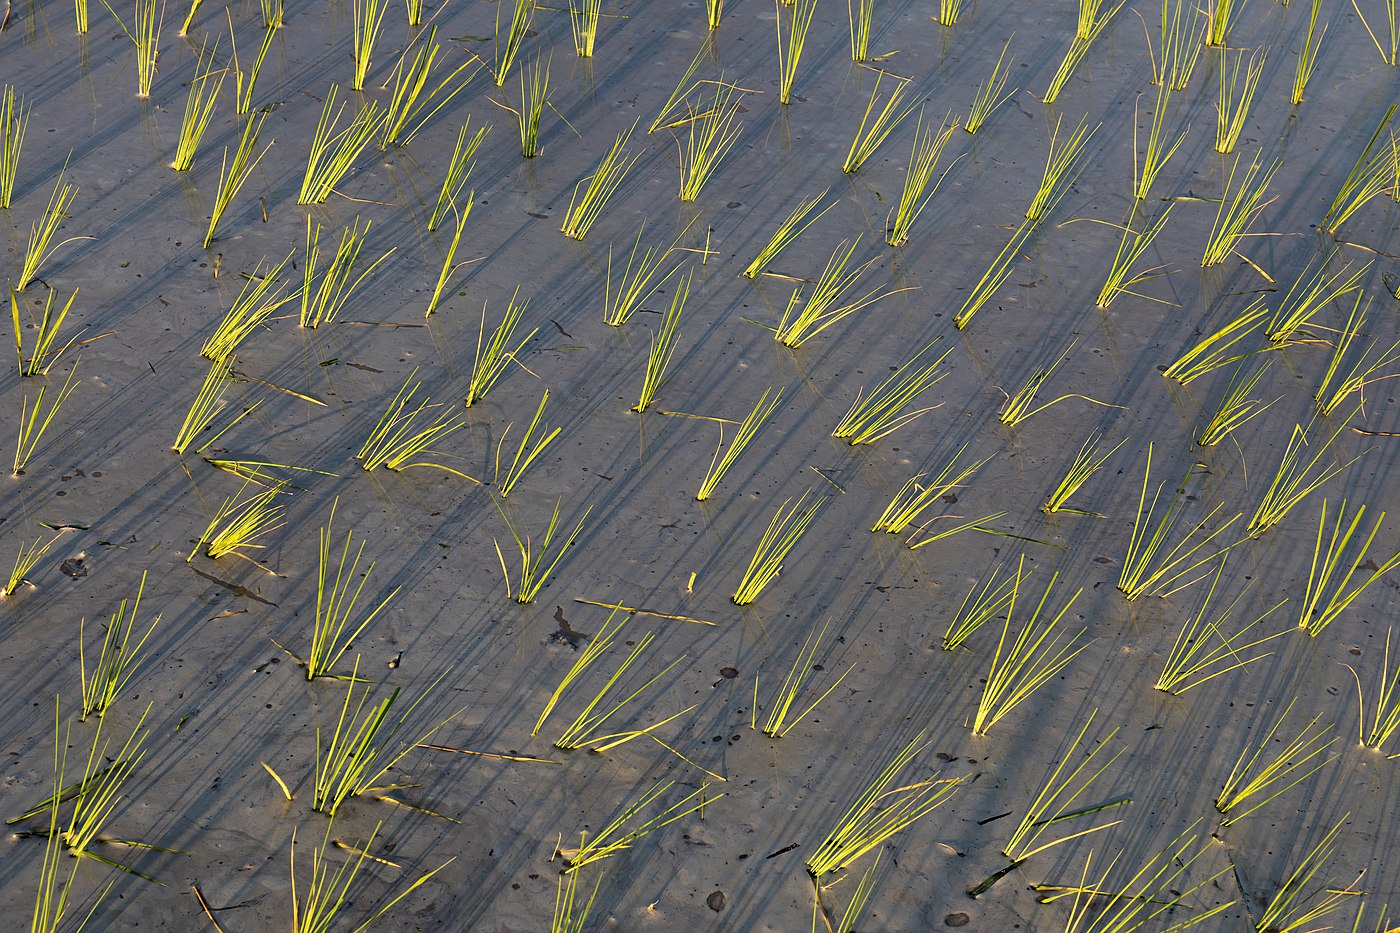 Green rice sheaves planted in a paddy field at golden hour